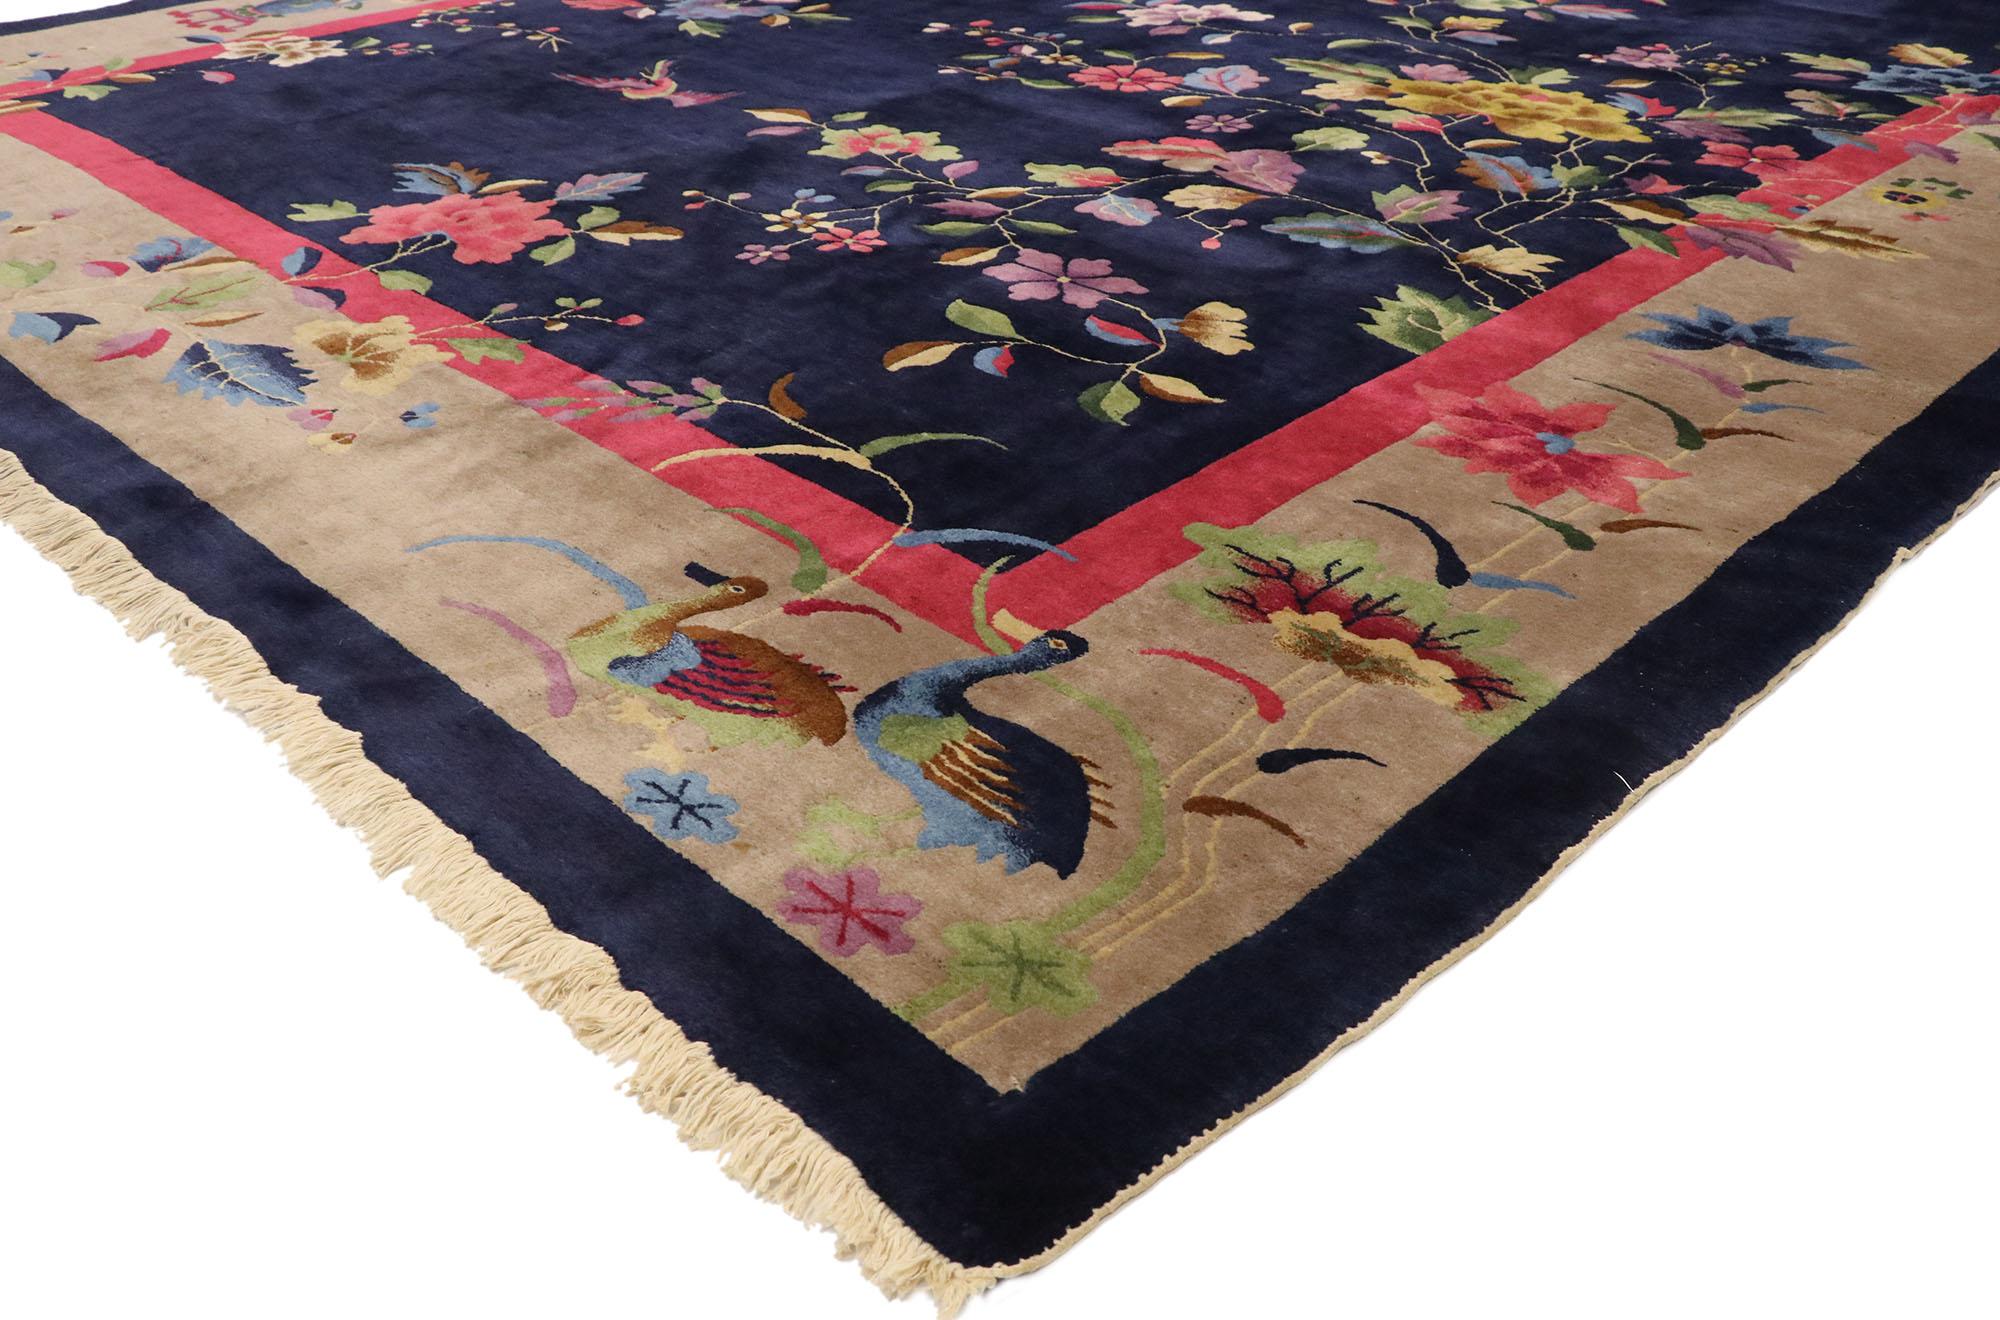 77452 antique Chinese Art Deco rug Inspired by Walter Nichols with Jazz Age style. This hand knotted wool antique Chinese Art Deco rug features elegant sprays of flowers interlaced with a variety of auspicious symbols overlaid upon an abrashed